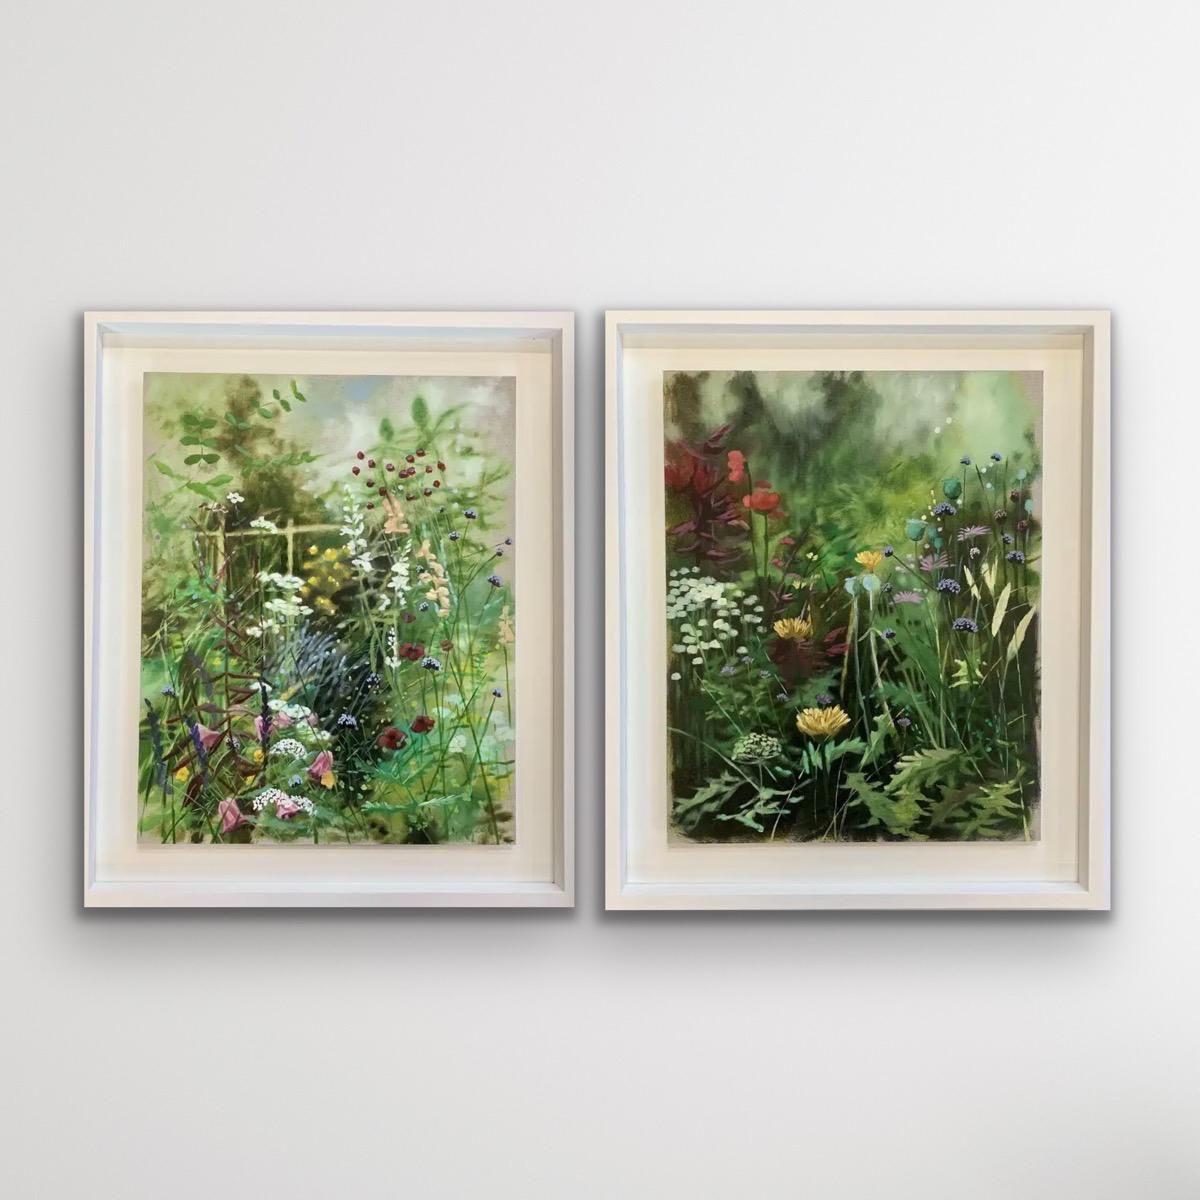 River Cottage Series (Large) and Hampshire Garden II Diptych  by Dylan Lloyd